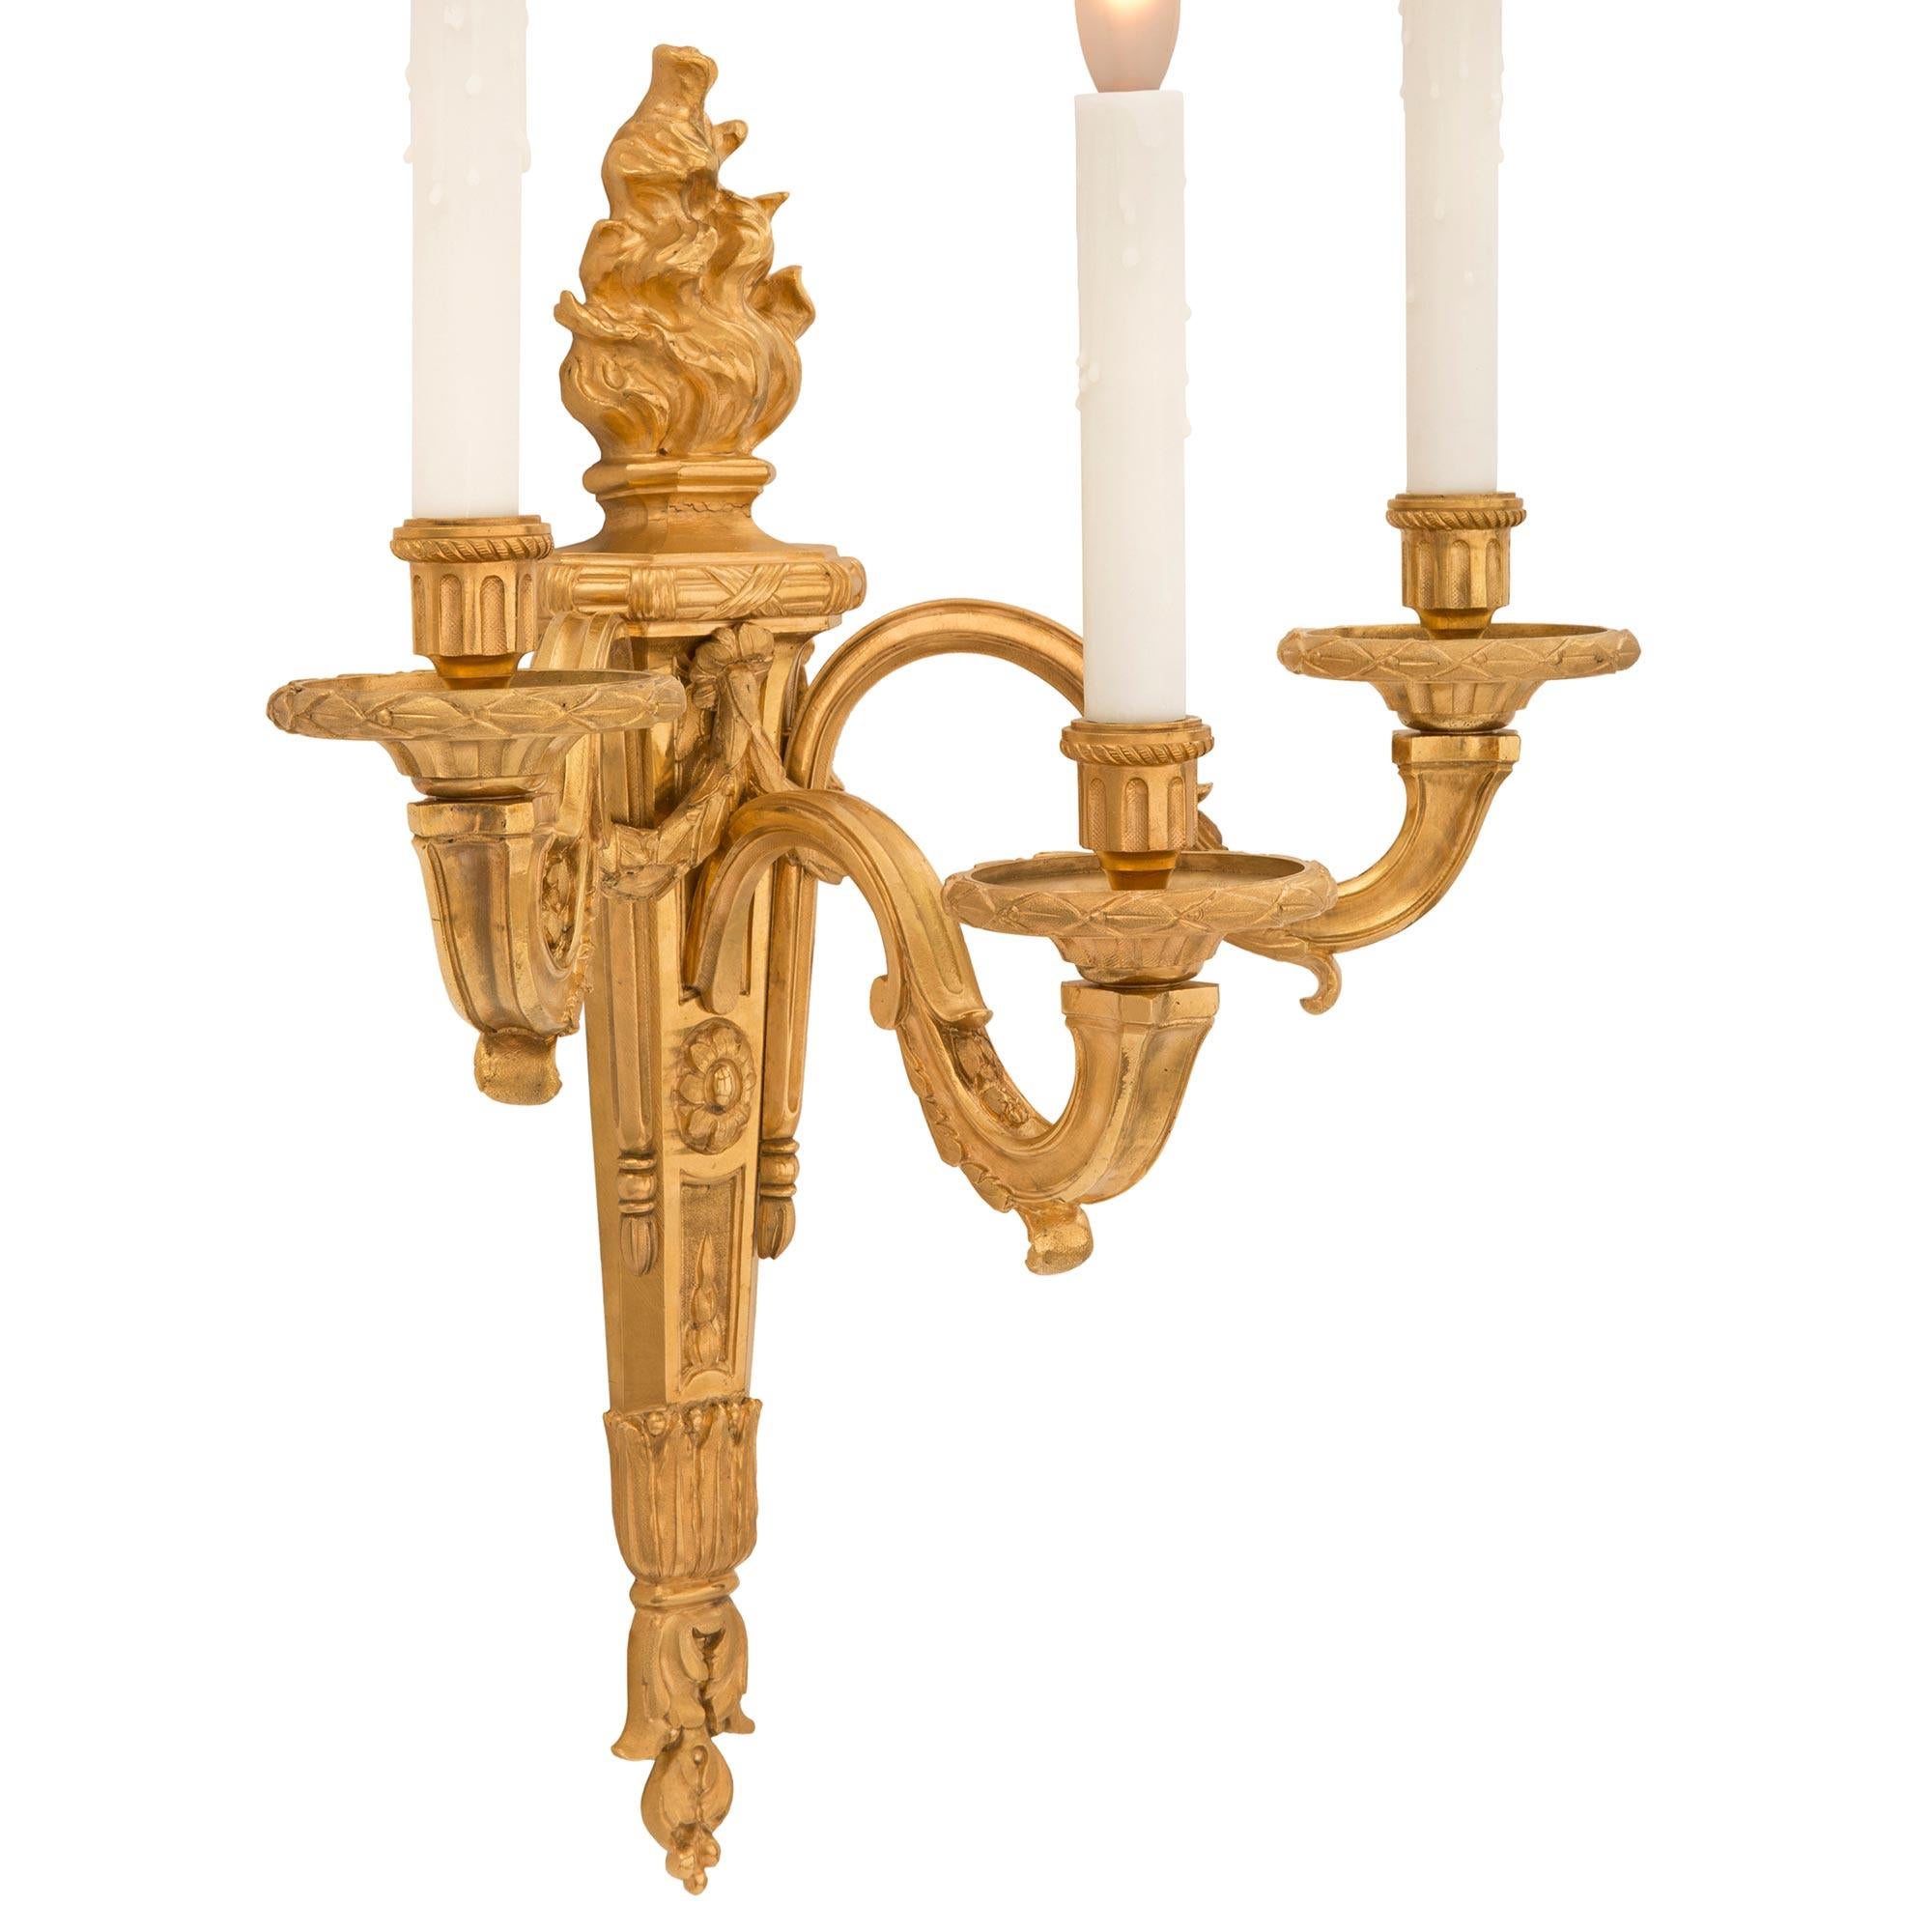 A striking pair of French 19th century Louis XVI st. ormolu sconces. Each three arm sconce is centered by a charming bottom foliate finial below the elegant tapered body decorated with finely detailed foliate designs, a charming floral reserve,